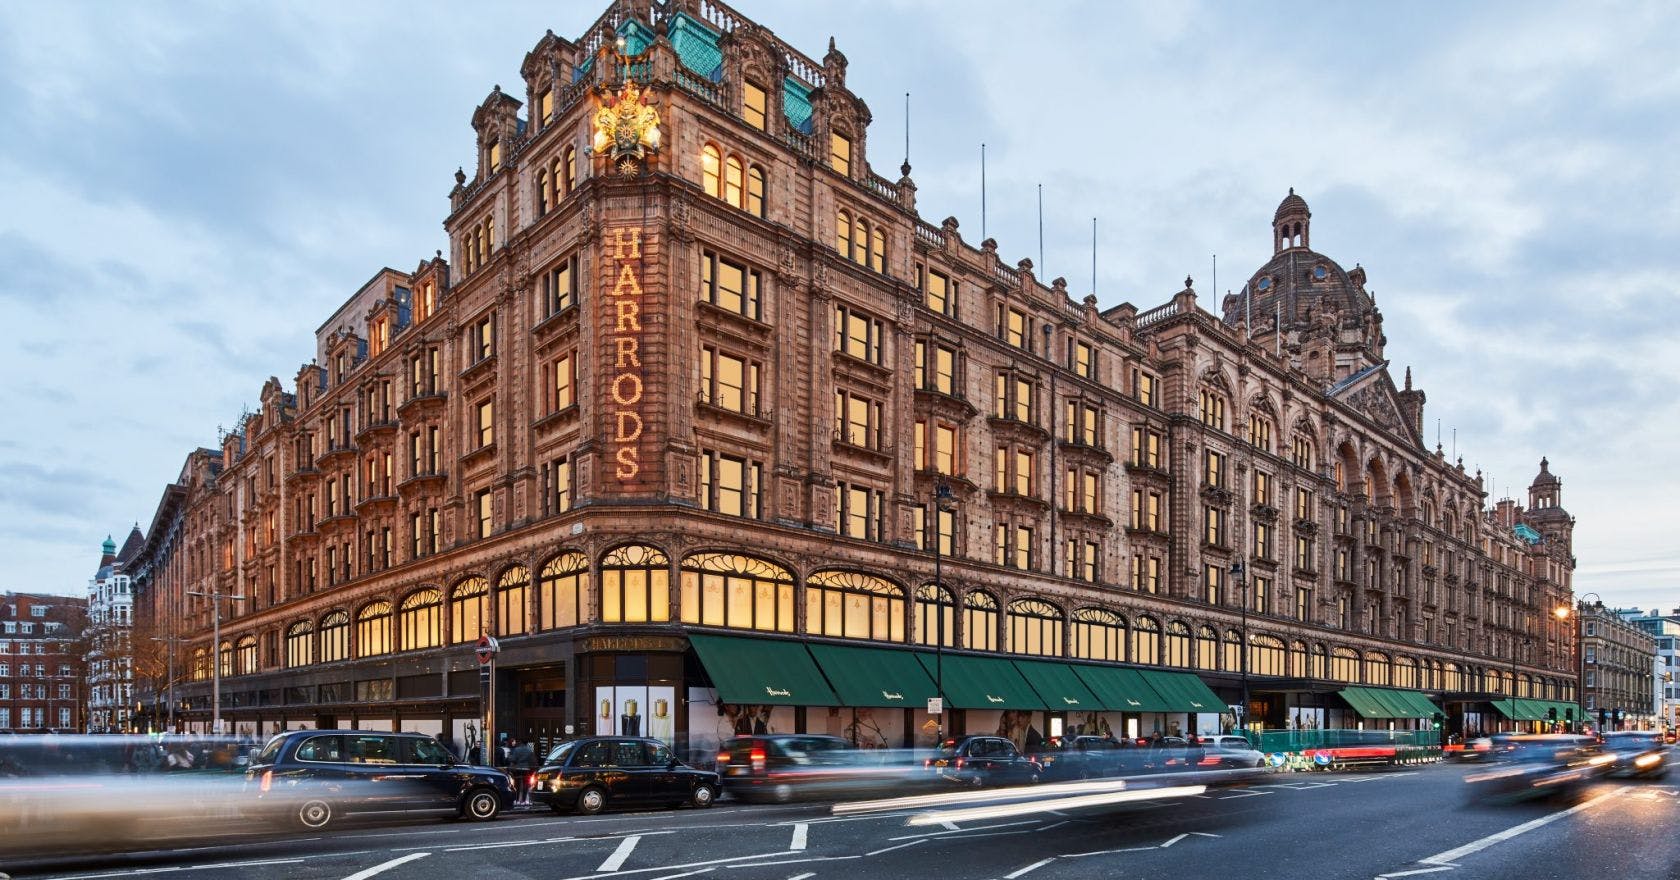 Harrods launches a permanent outlet store in Westfield London